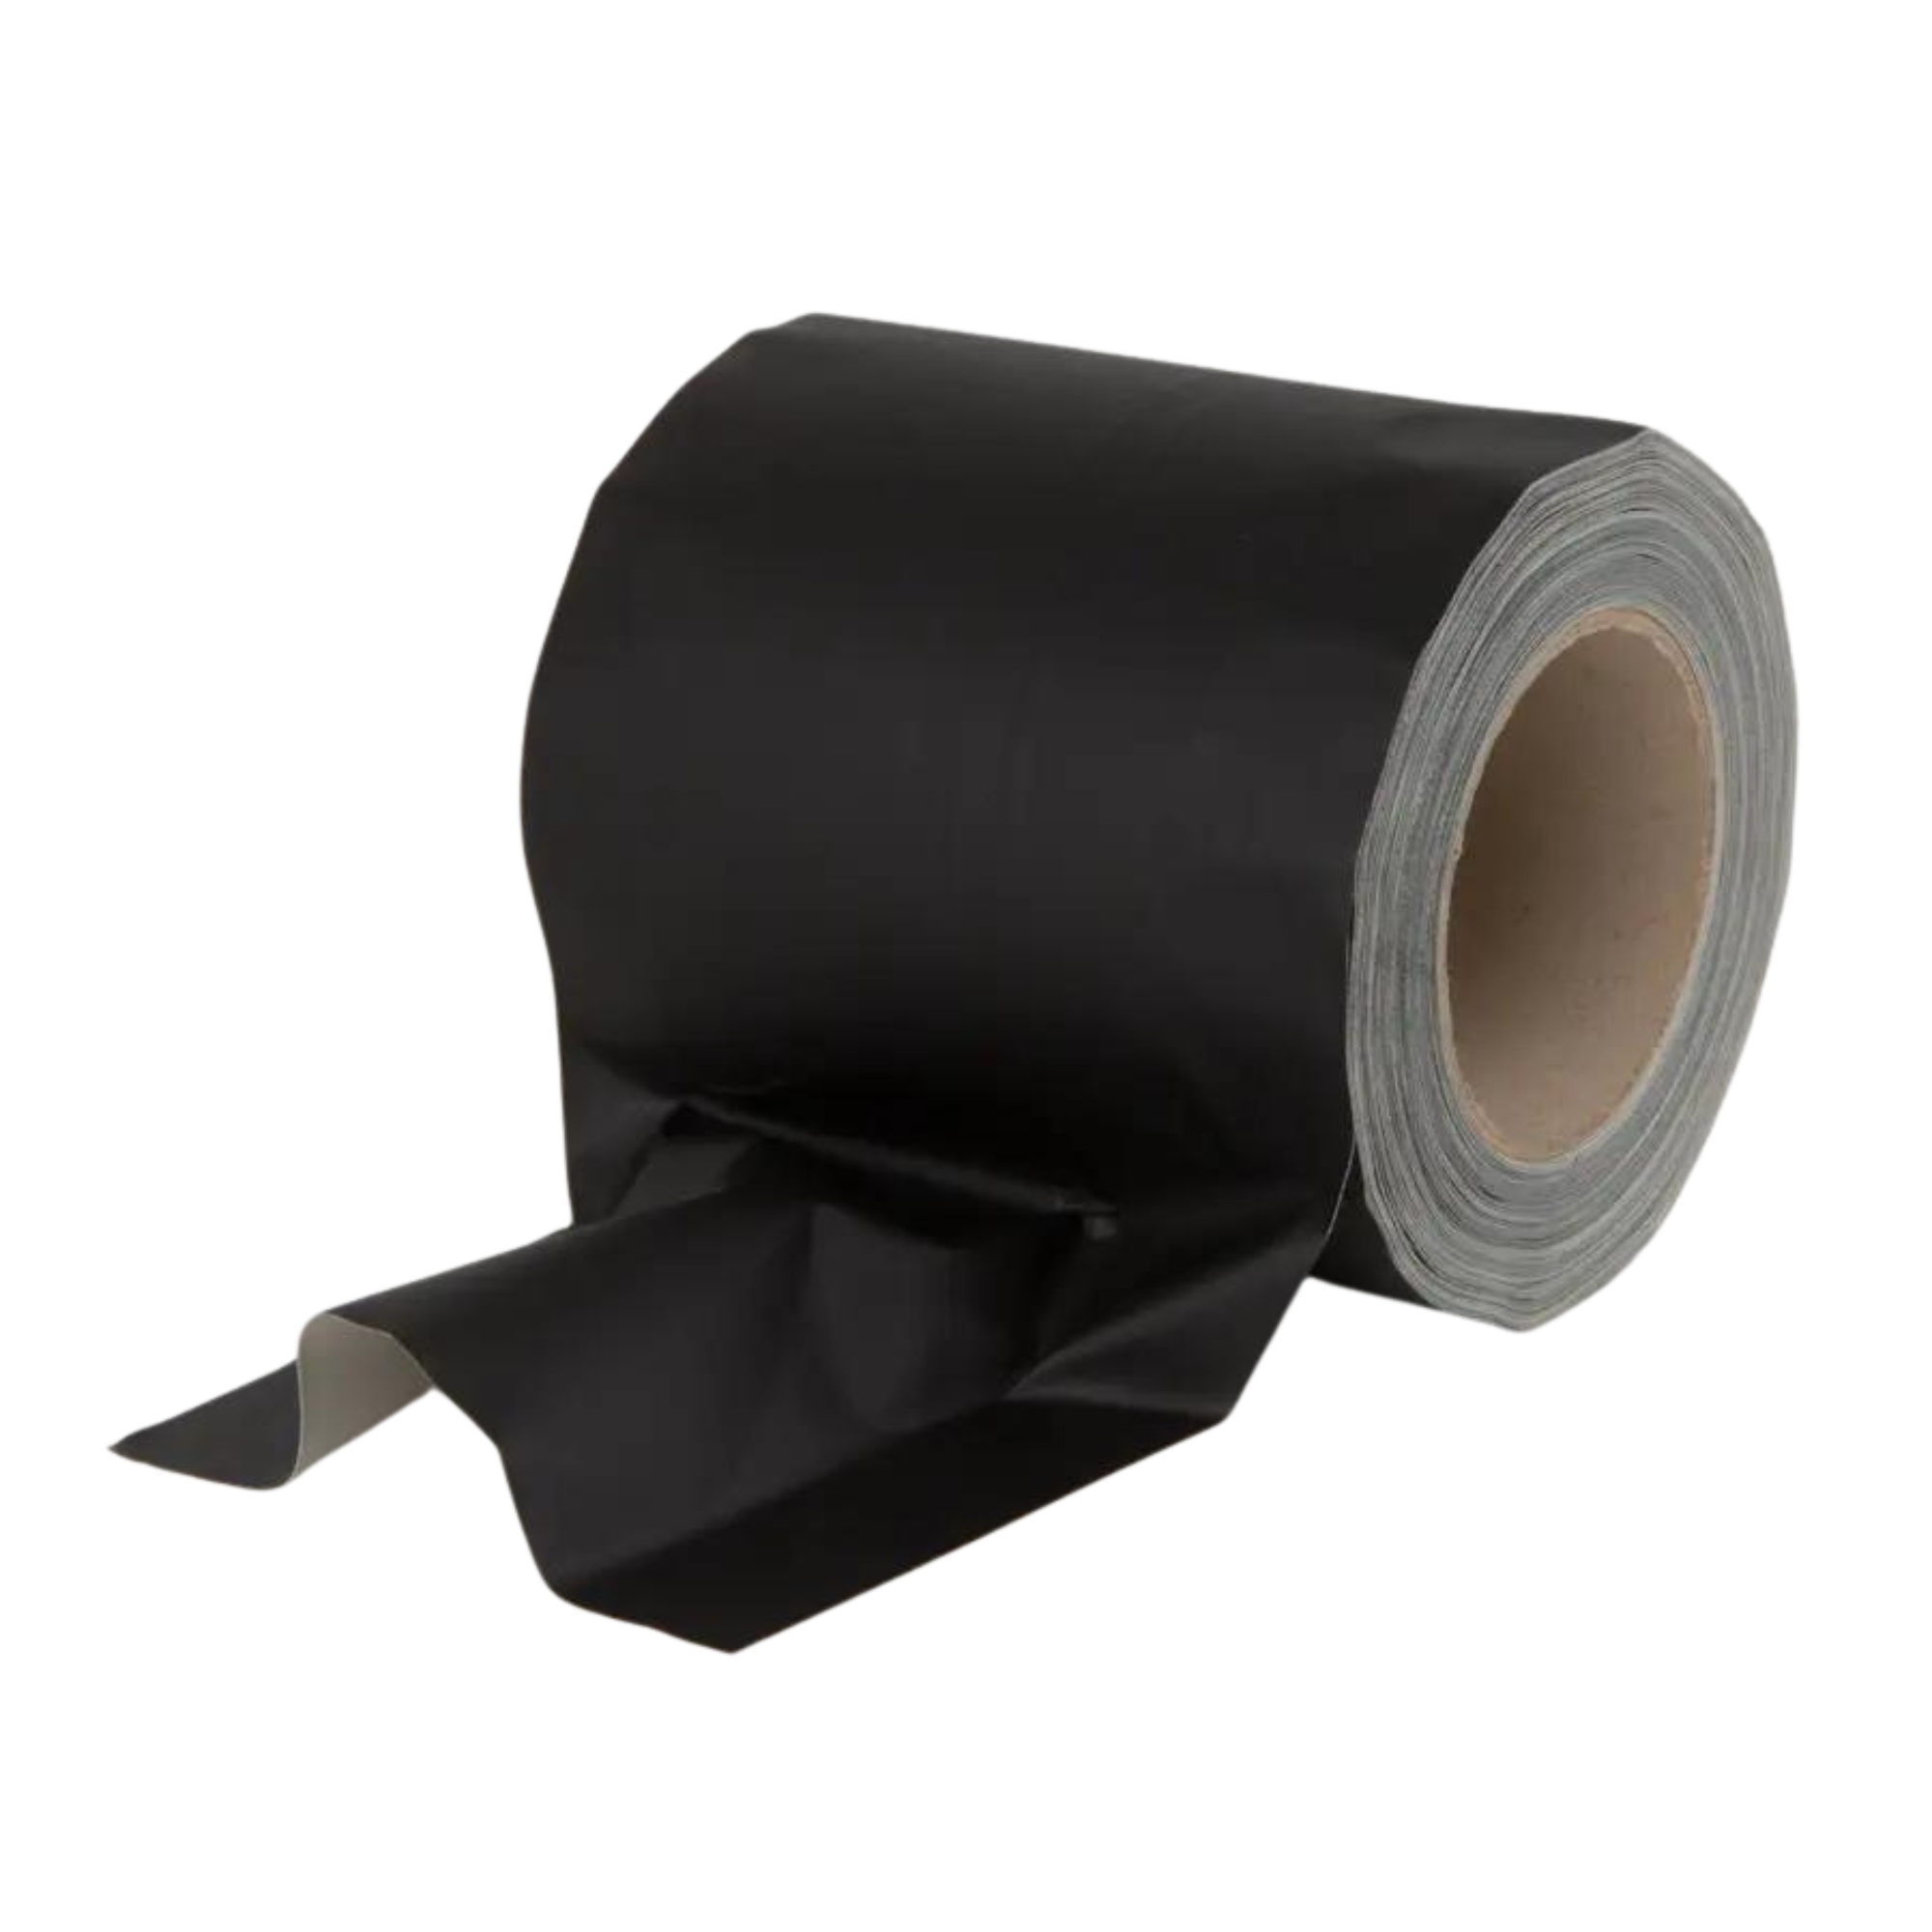 Le Mark Slipway™ Cable Cover 'Tunnel Tape' schwarz 